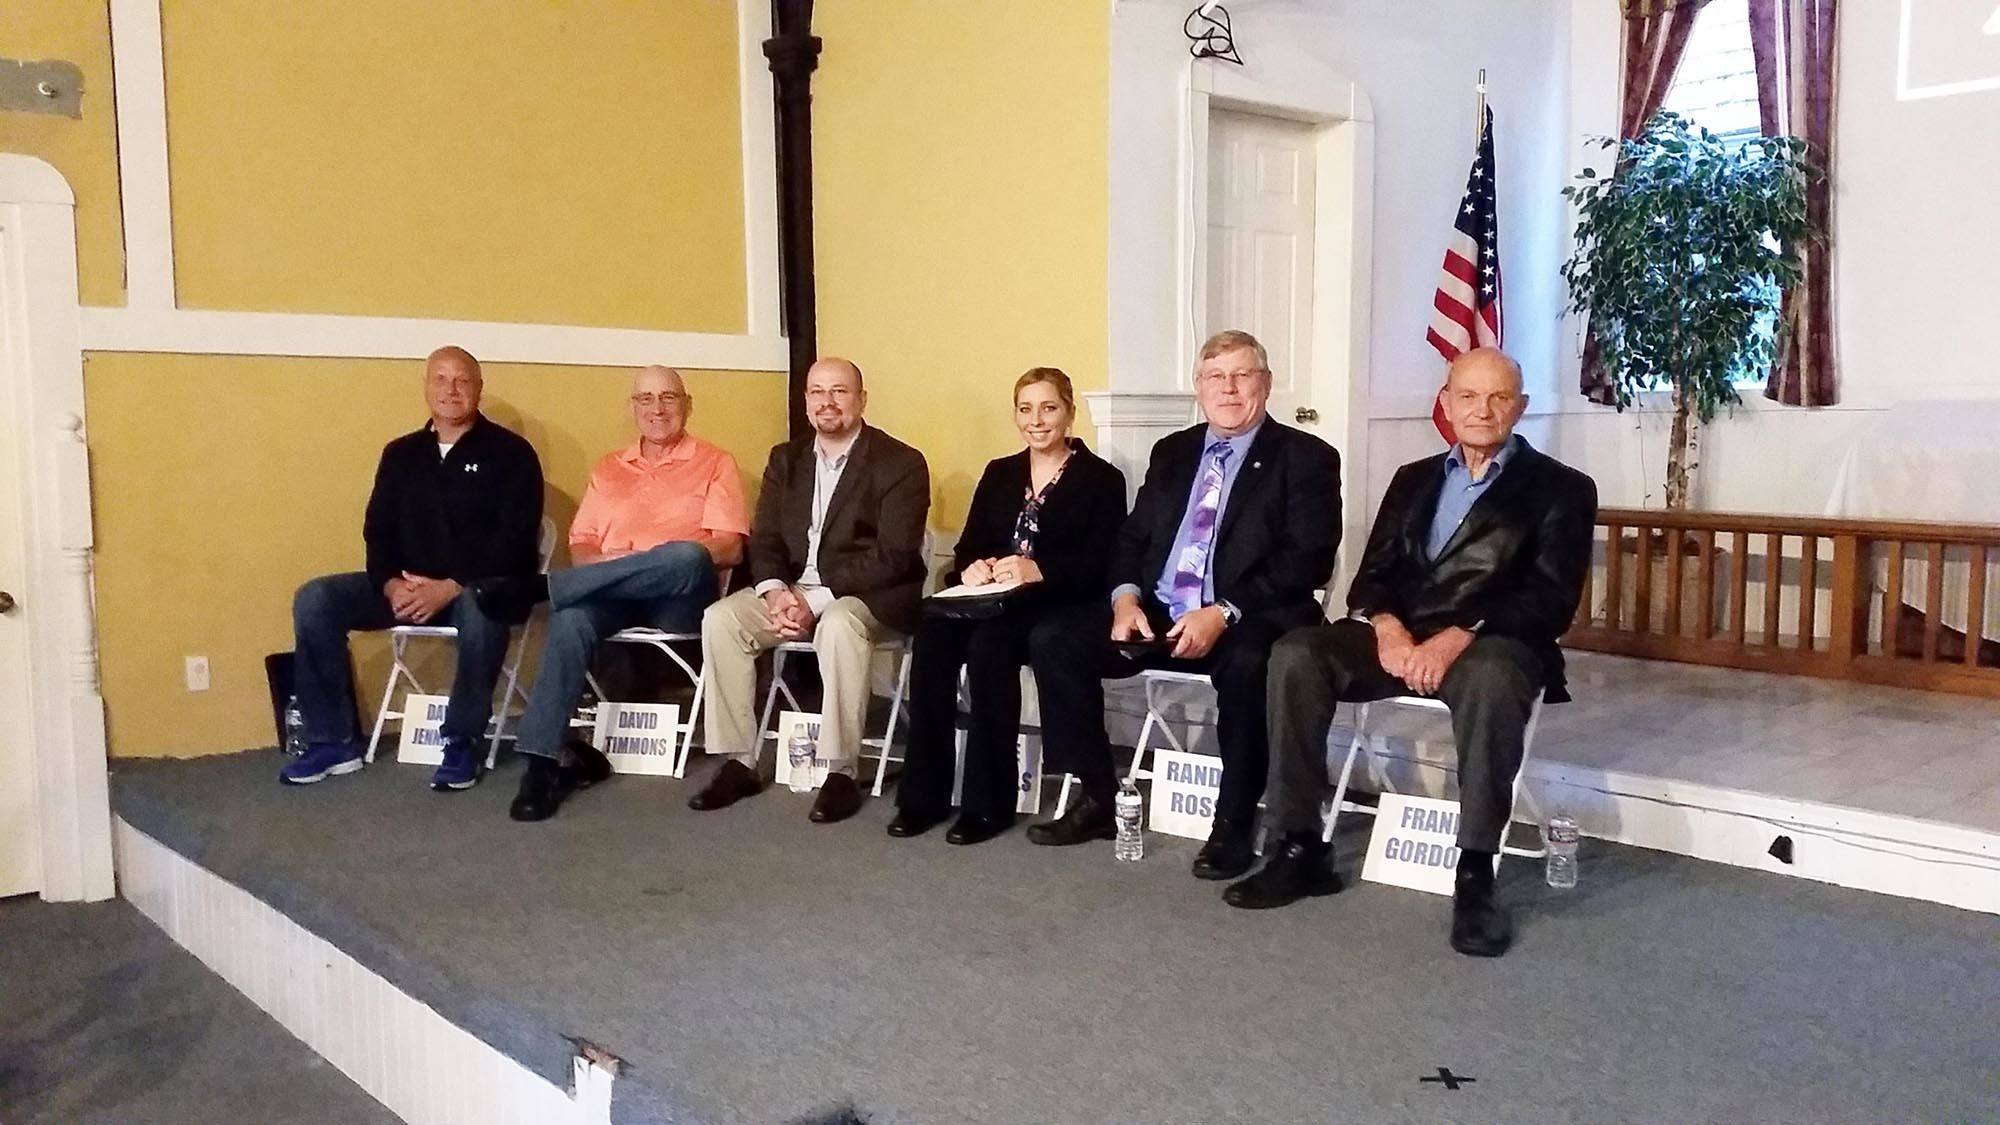 Candidates for Grays Harbor County Commission and GHPUD on Tuesday evening as they wait for a political forum to begin. From Left: Dave Jennings, Dave Timmons, Wes Cormier, Jamie Nichols, Randy Ross and Frank Gordon. Terri Harber/The Daily World